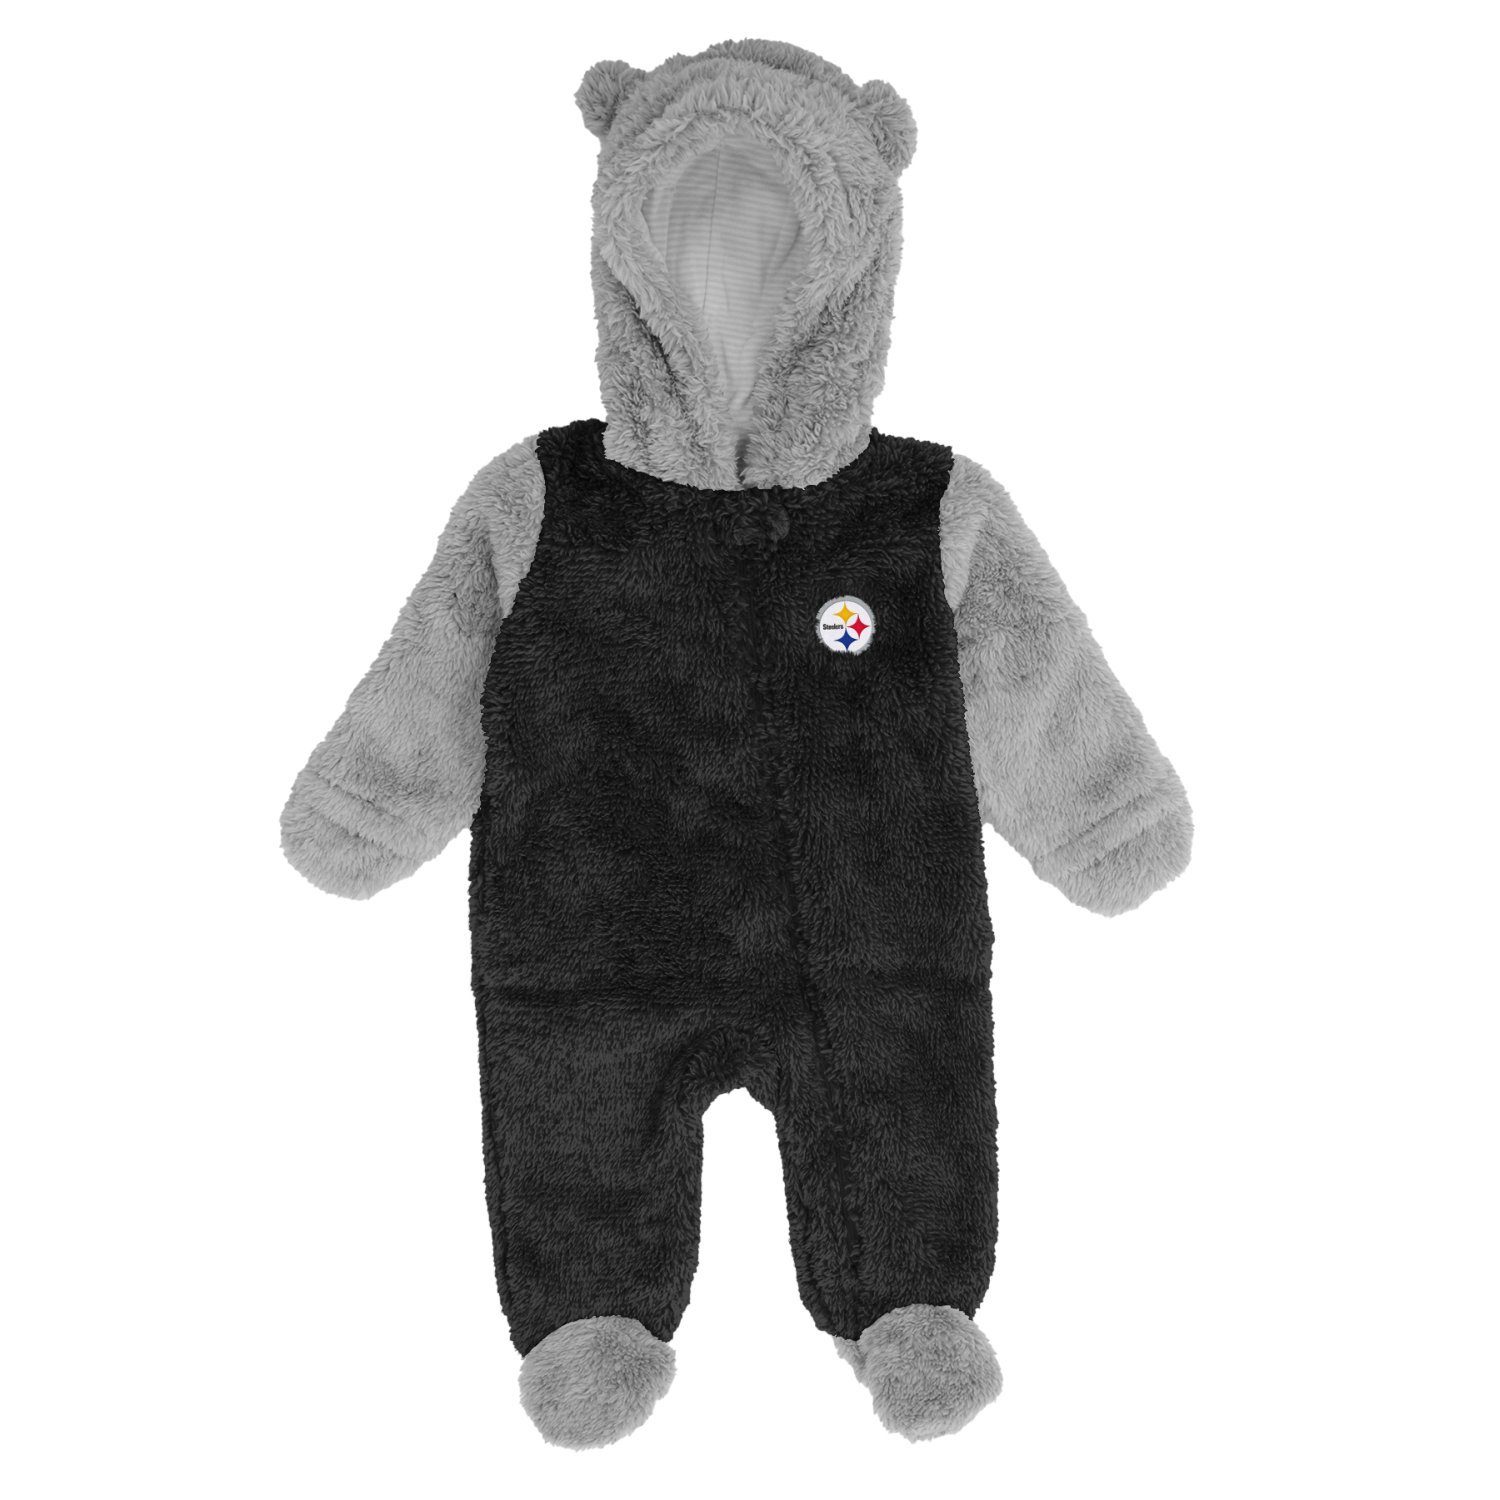 Outerstuff Kapuzenpullover NFL Teddy Overall Steelers Pittsburgh